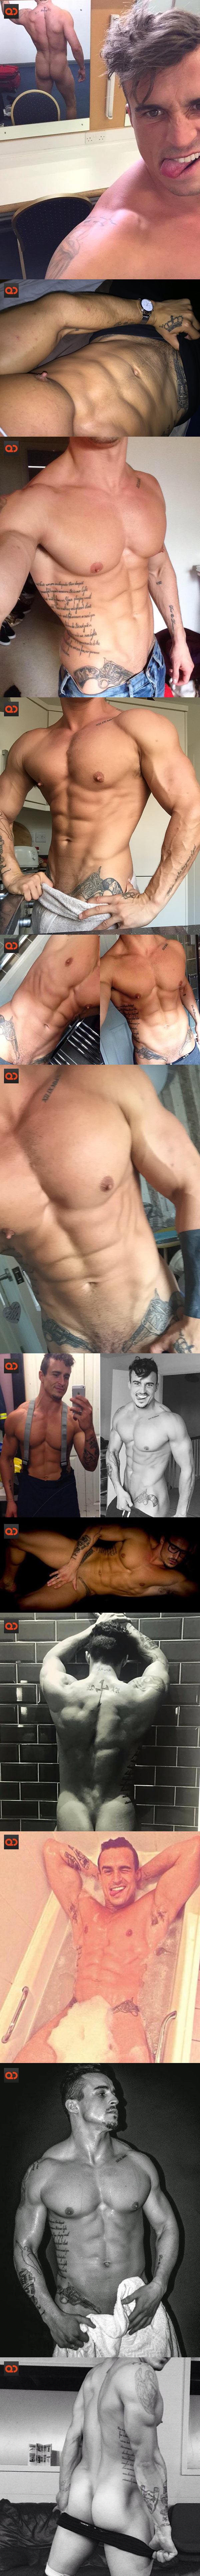 Lotan Carter, From Big Brother UK, Cock Exposed In Leaked Skype Call!